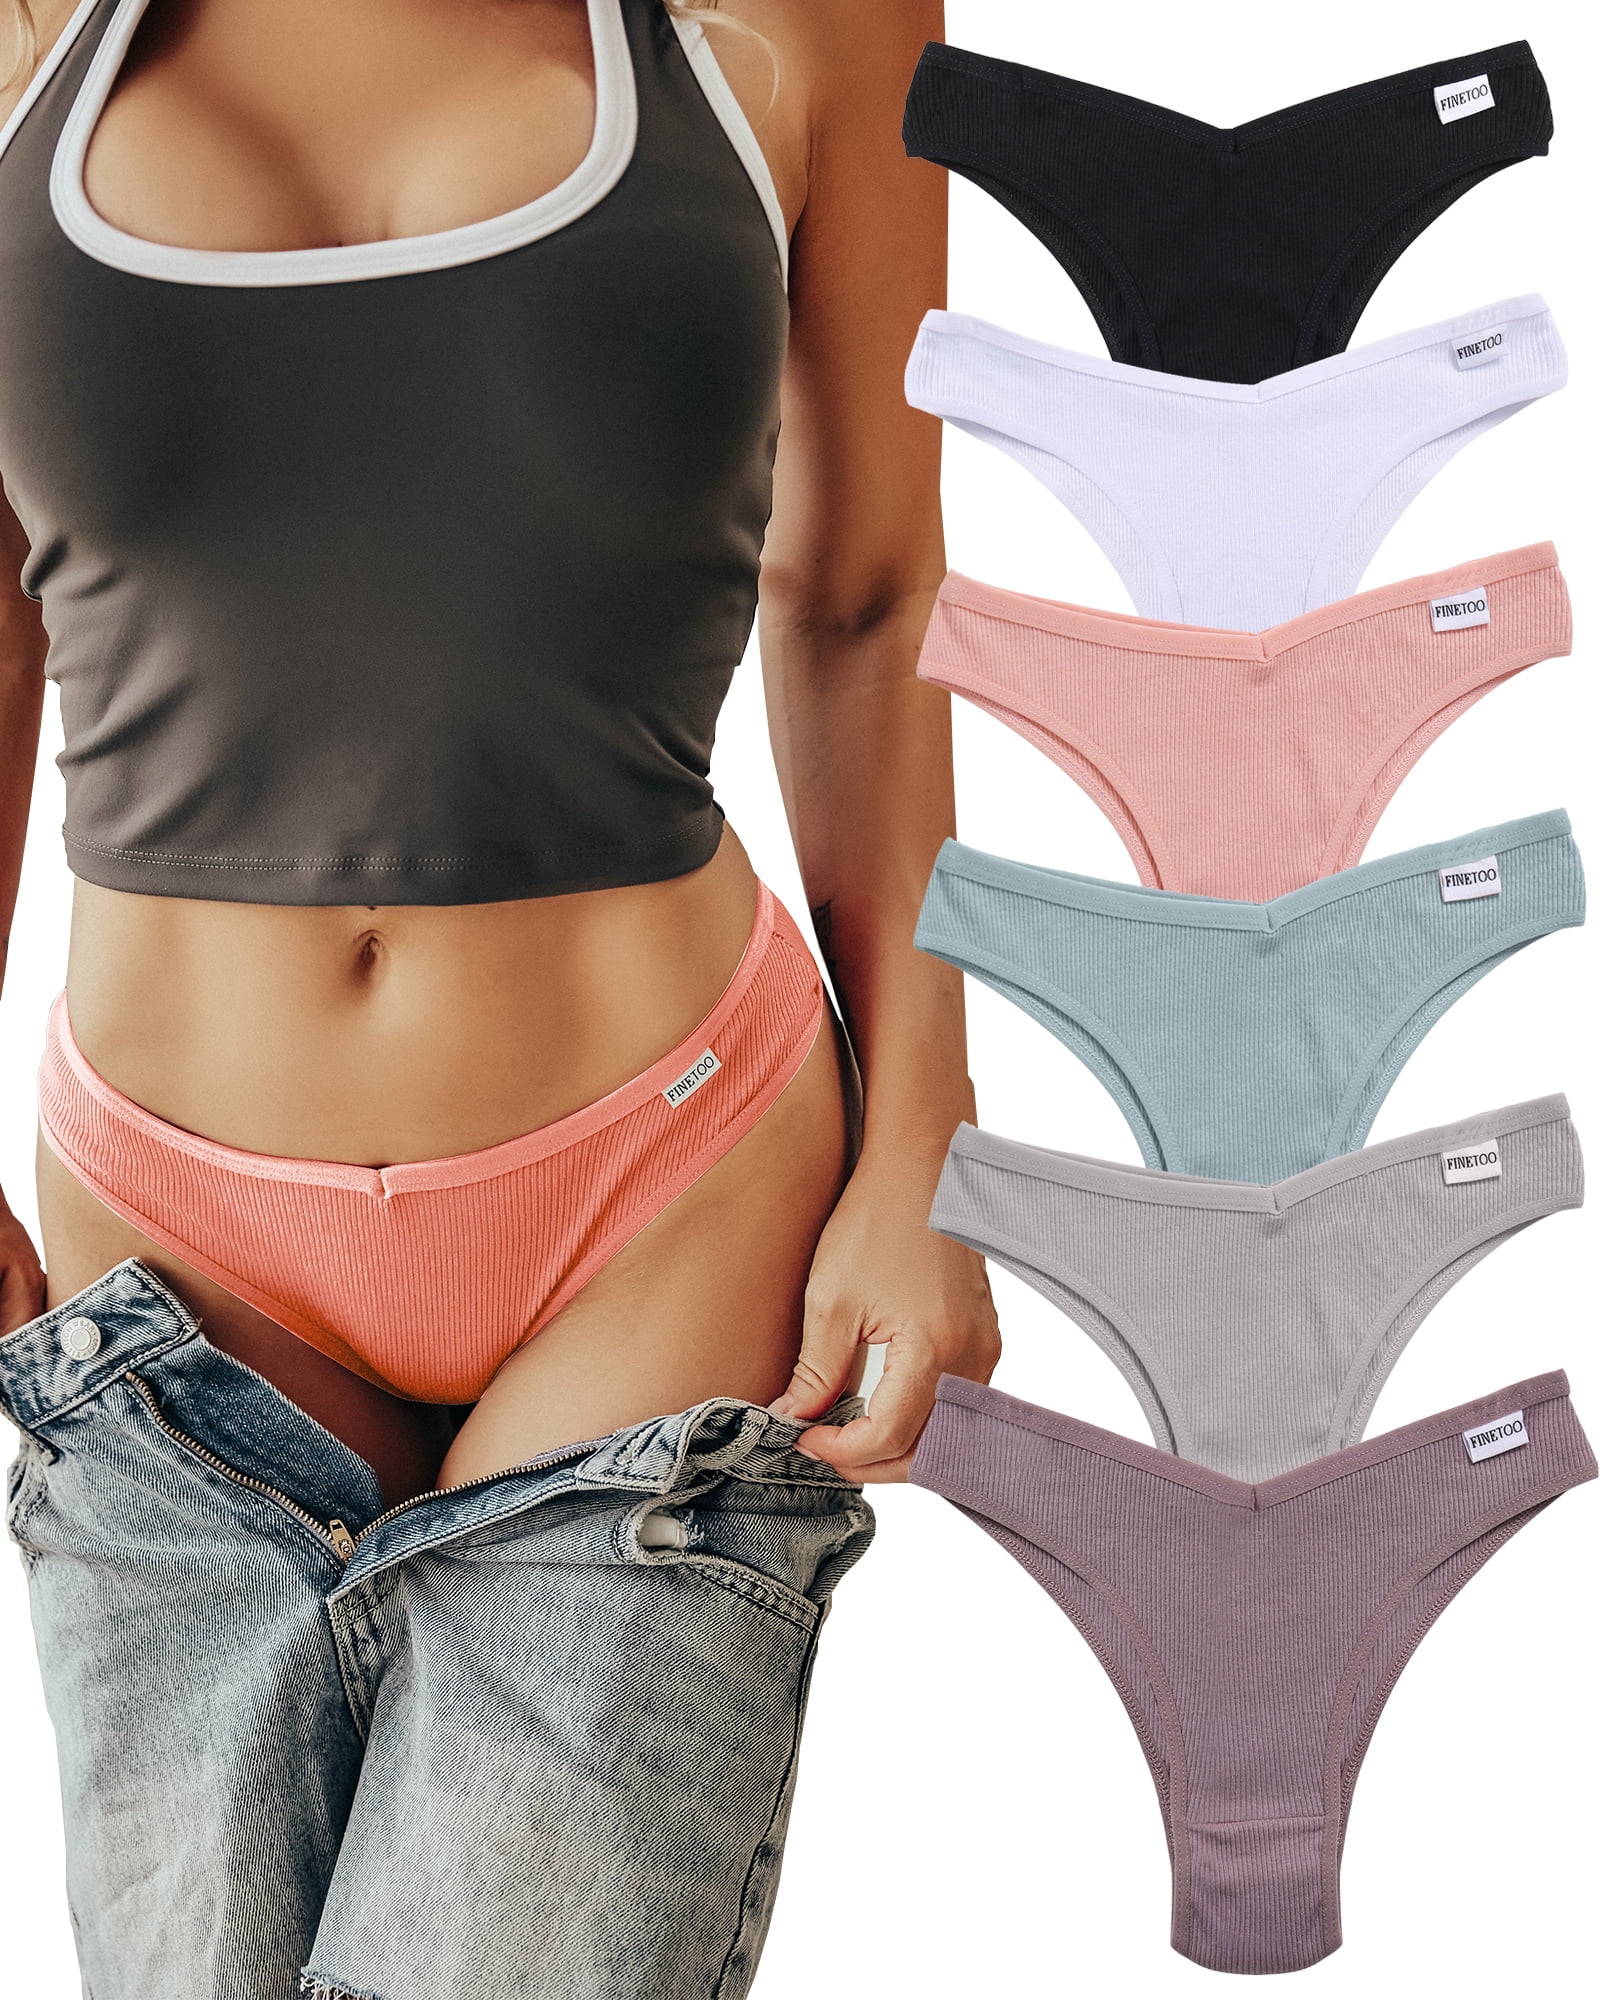 FINETOO Women Cotton Underwear Cheeky Panties Low Rise Bikini Hipster  Breathable Stretch XS-XXL Pack of 6Pack